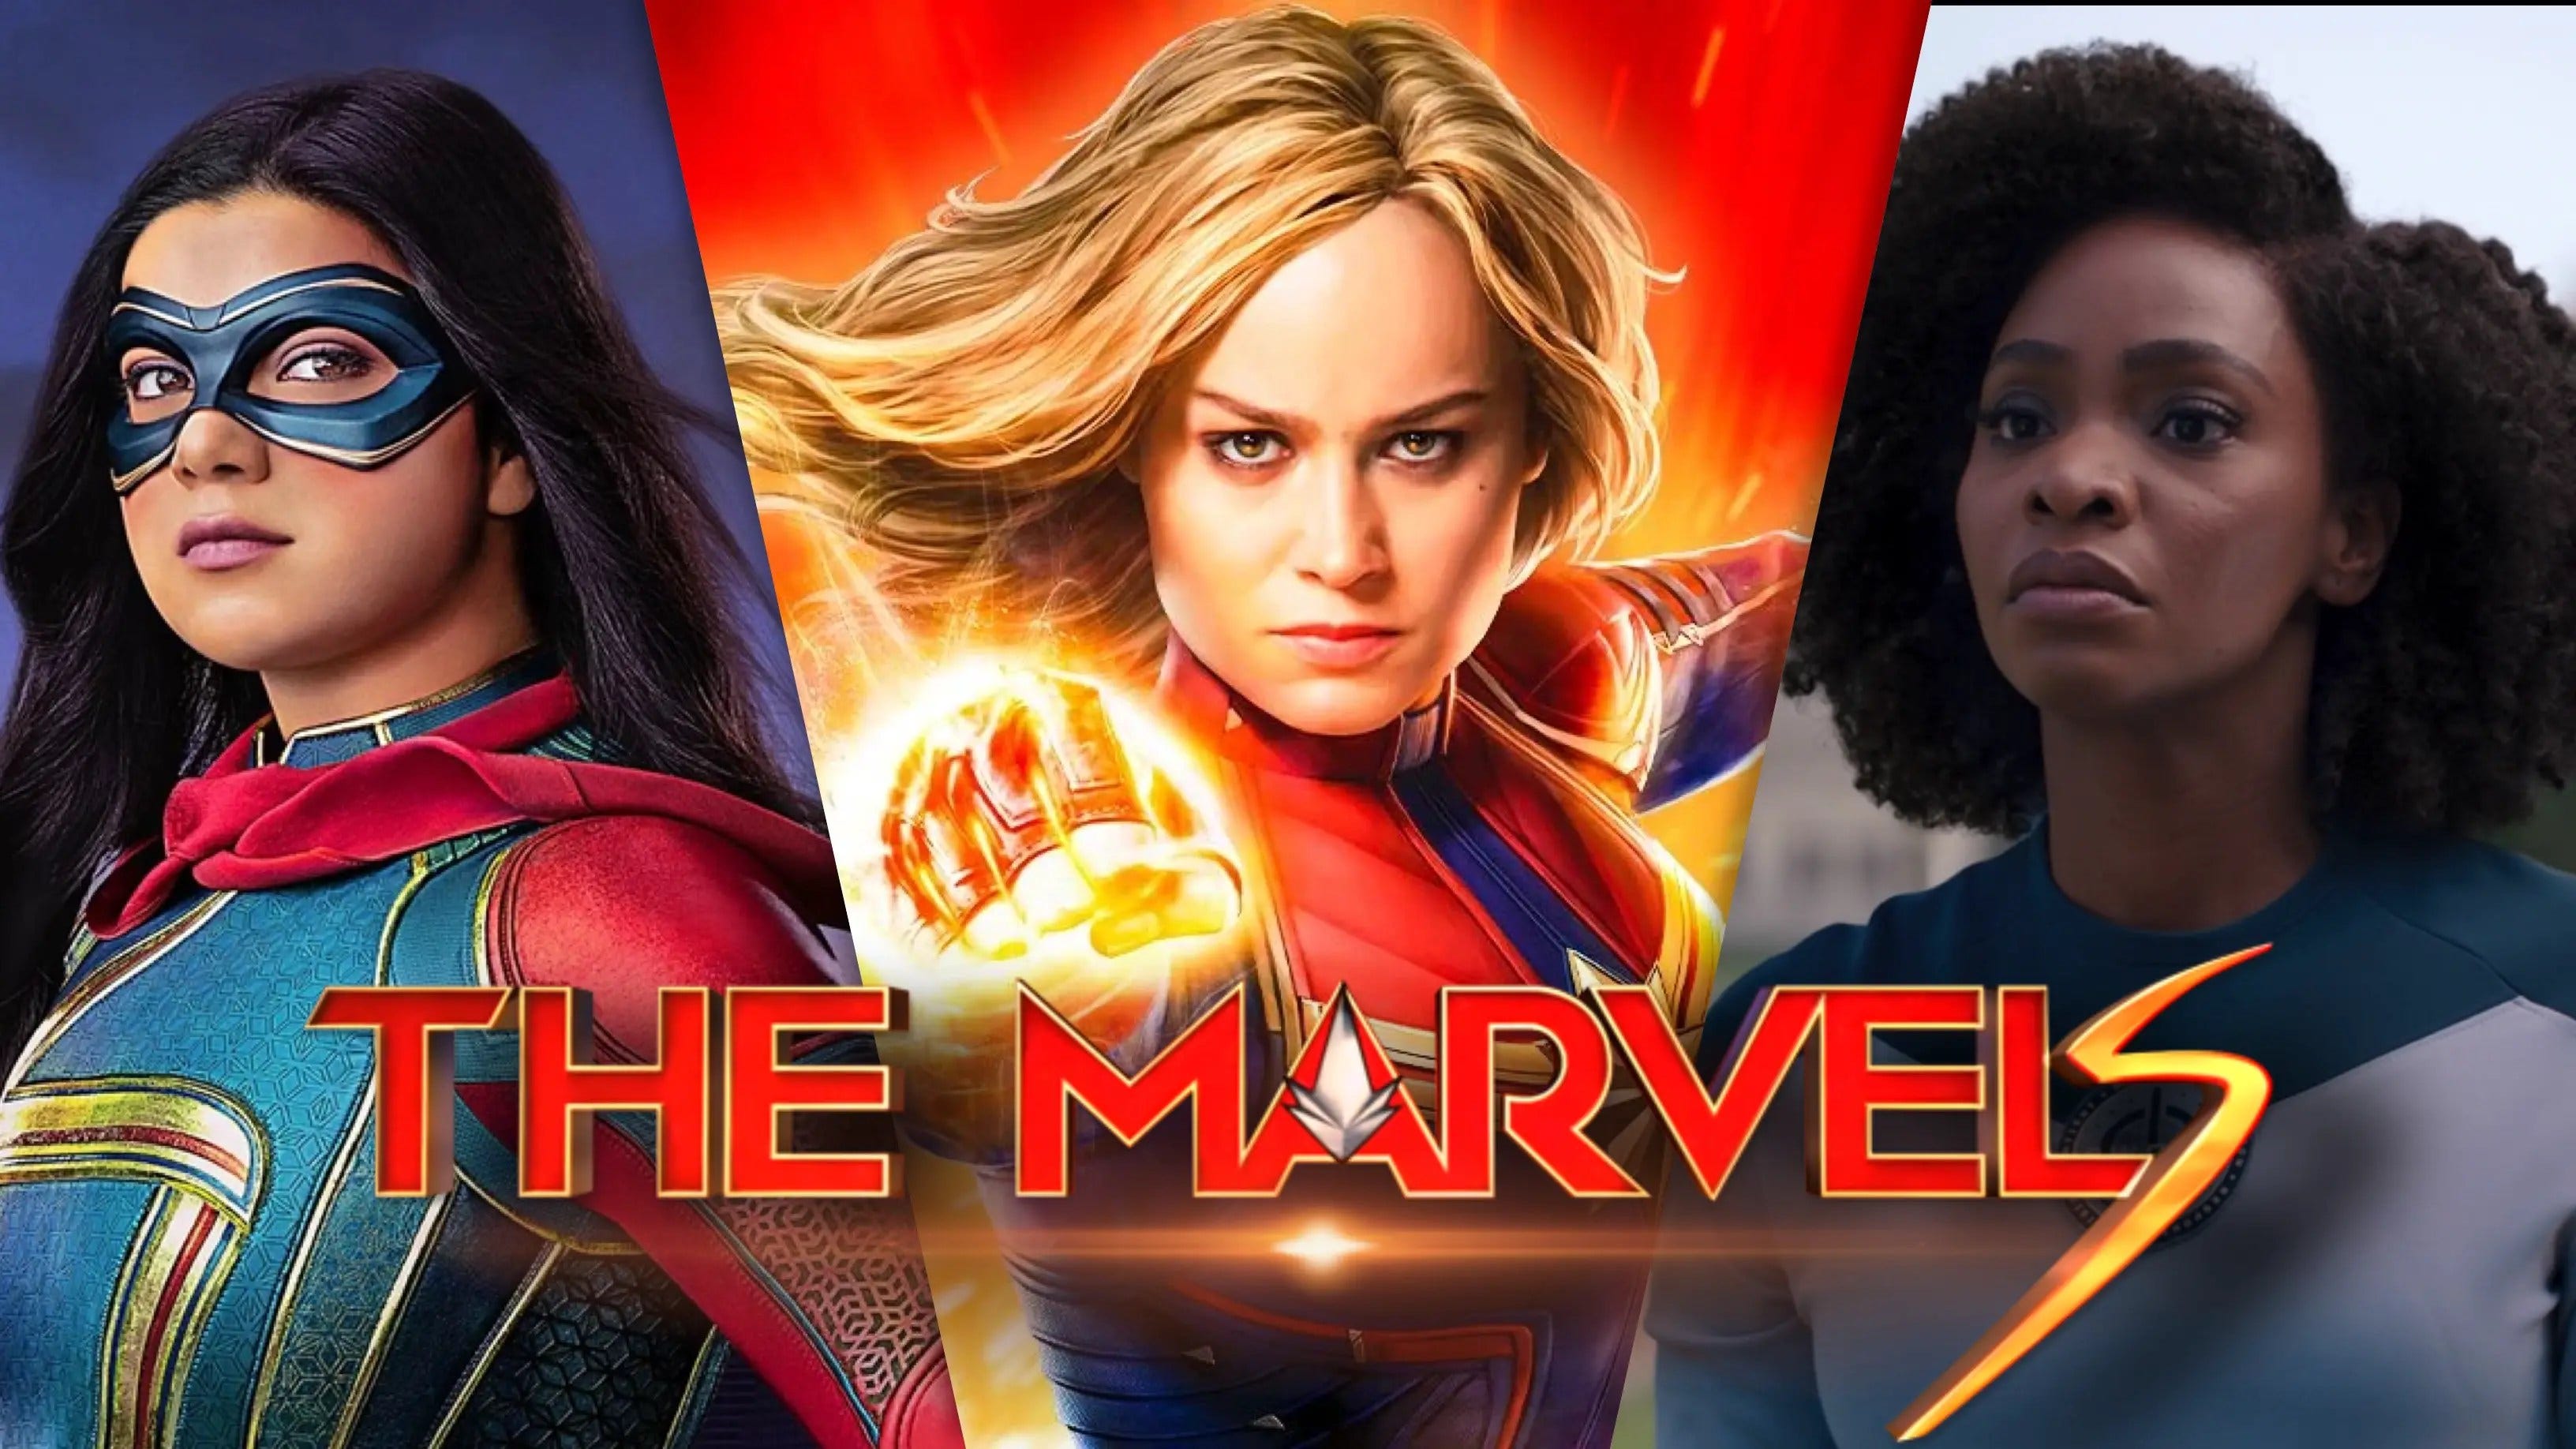 The Marvels and How It Took Me Forever to Watch It